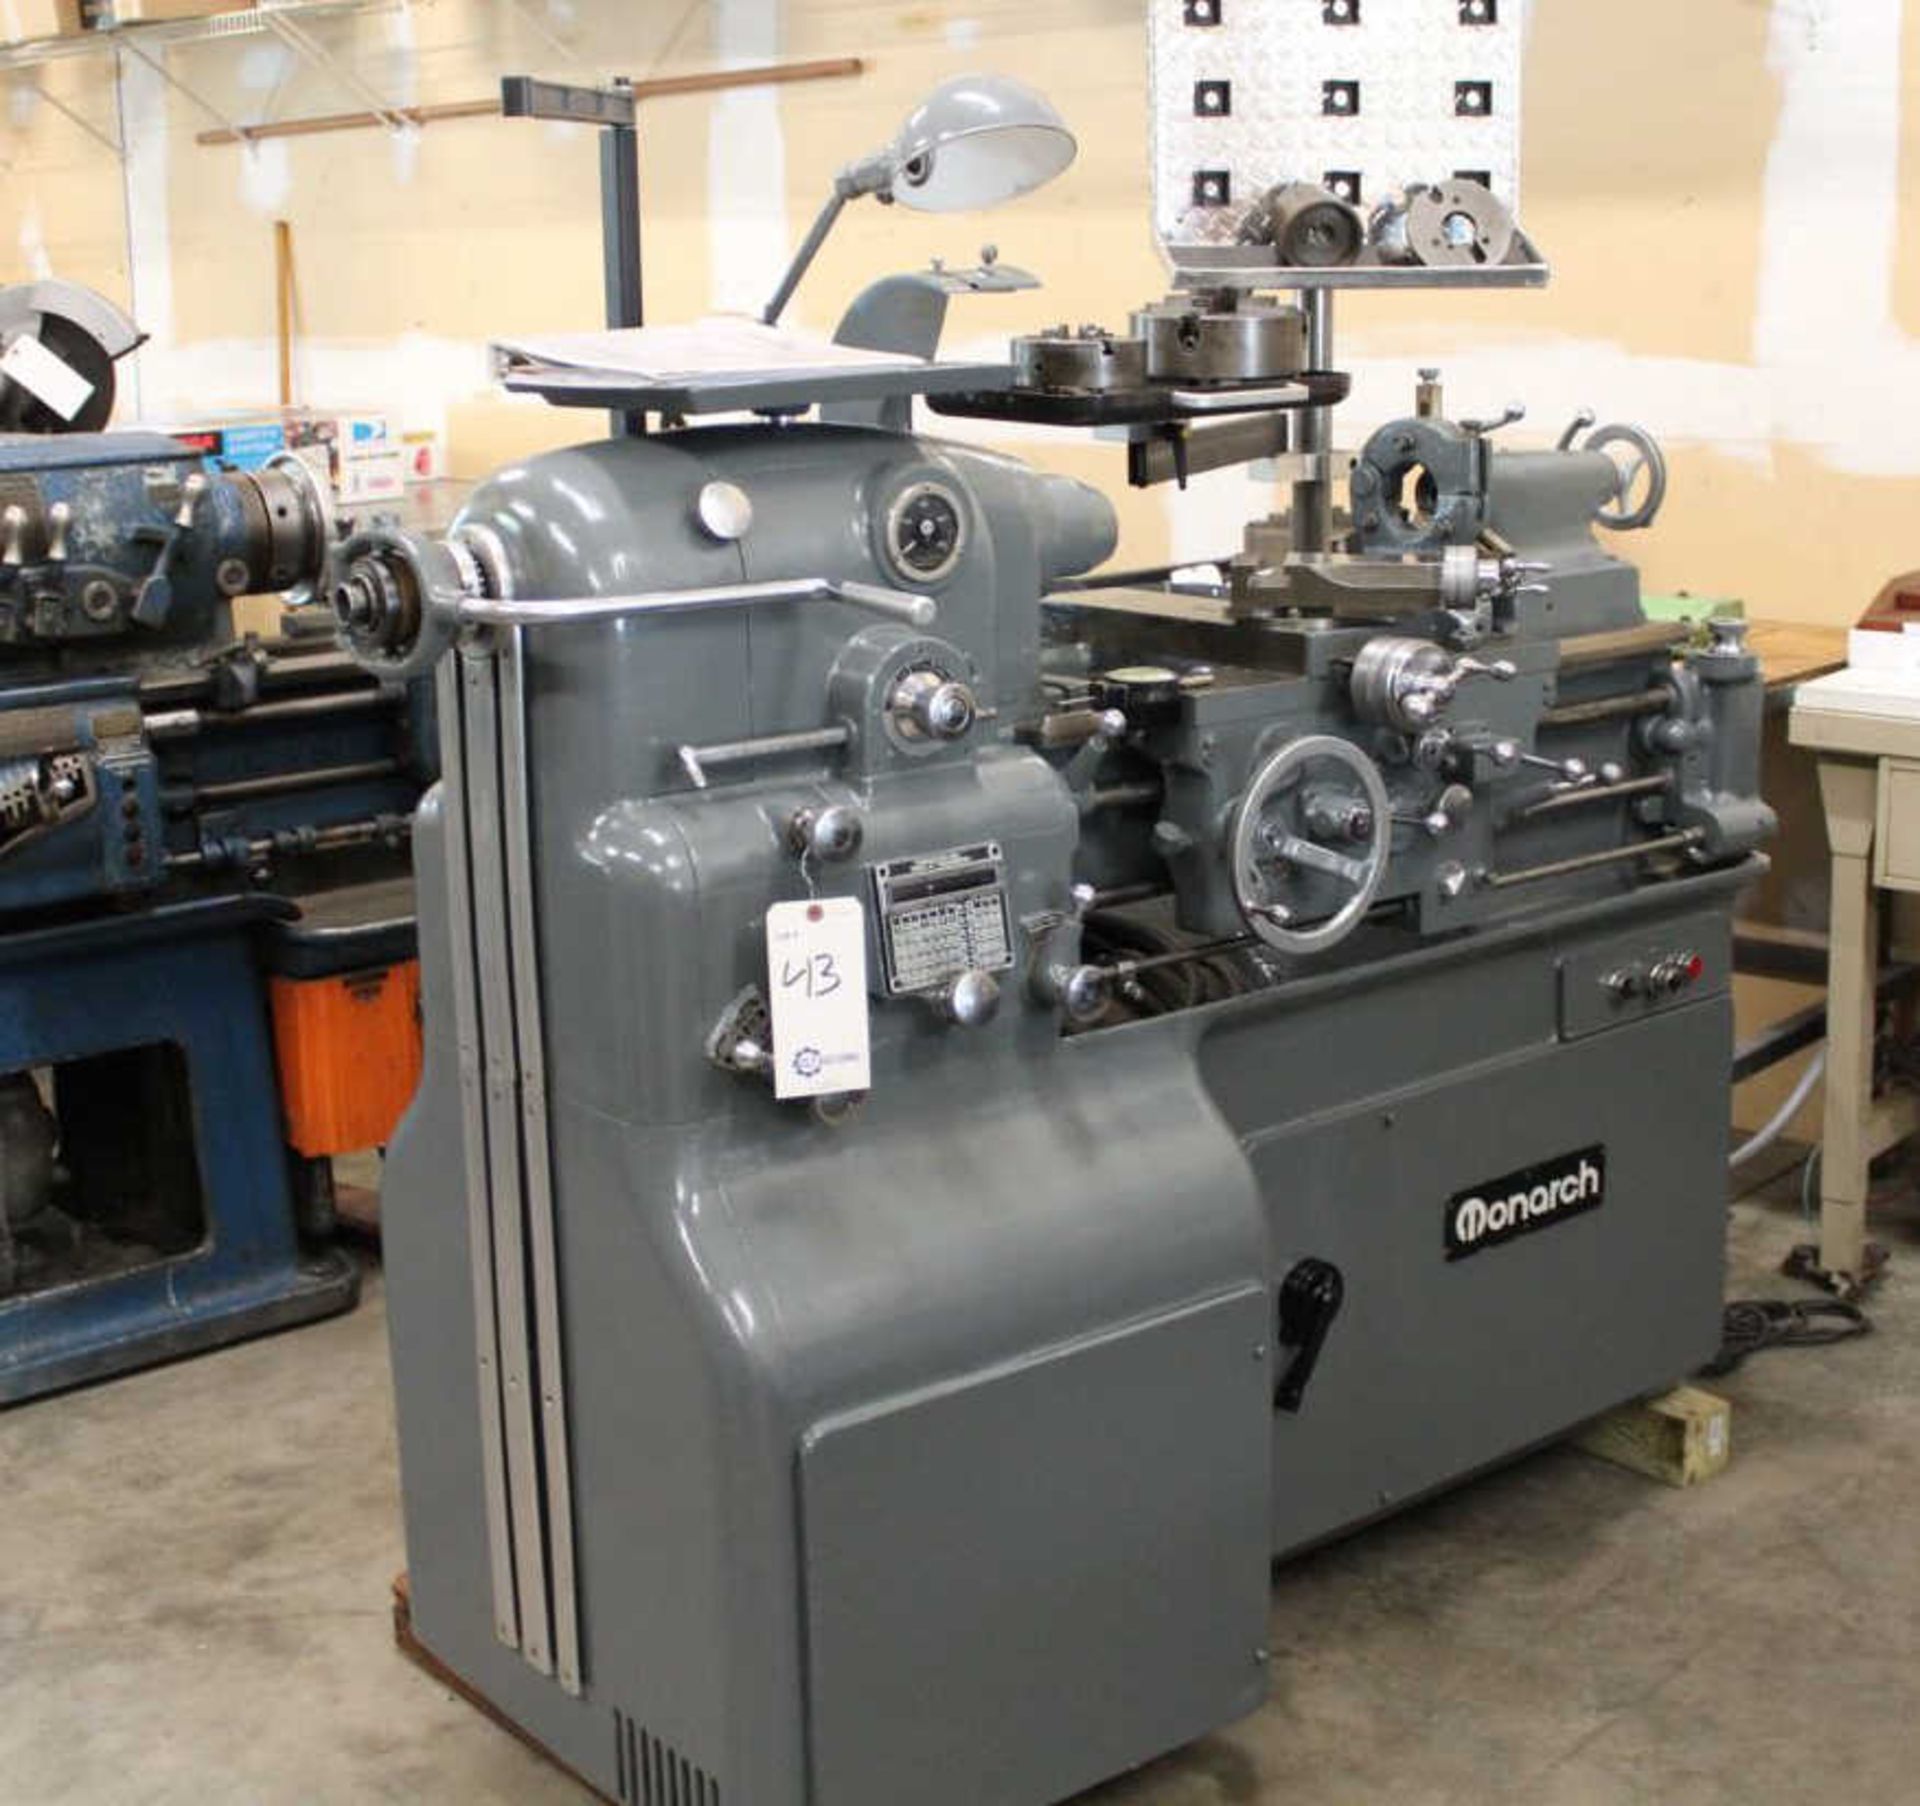 Monarch 10EE Precision Tool Room Lathe 12.5" x 20" Centers, Includes taper attachment, 3 & 4 jaw